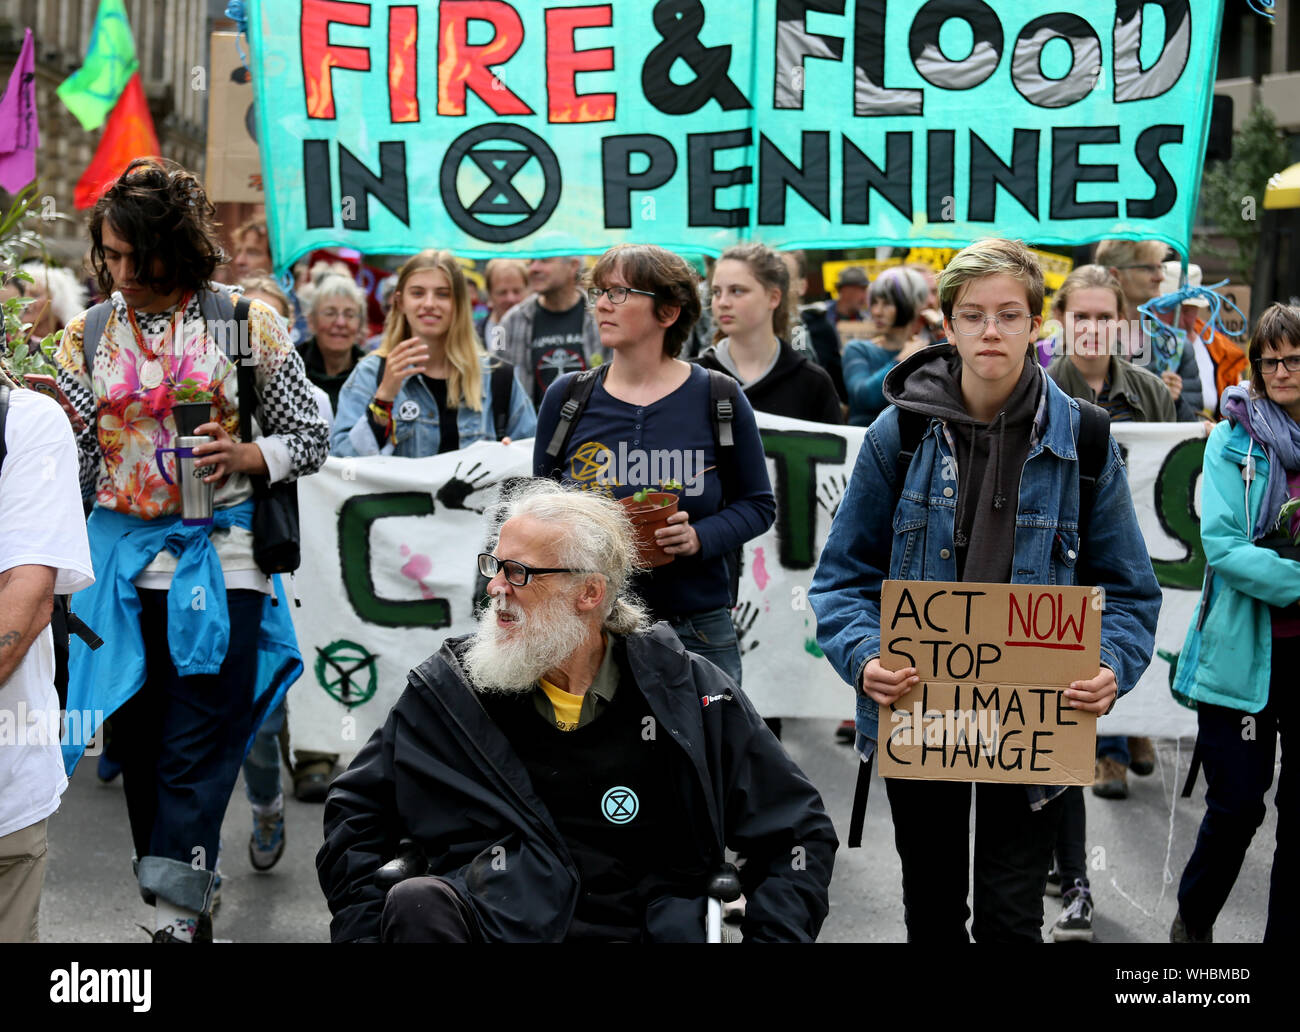 Manchester, UK. 2nd September, 2019. Extinction Rebellion climate protesters take their message around the city centre blocking roads and targeting banks and businesses. Several protesters glued their hands to the premises outside Barclays and HSBC.  The campaigners held several "die ins" outside Primark, HSBC, Barclays business center and on land earmarked for car parking which the campaigners want turned into green space.  Manchester. UK. Credit: Barbara Cook/Alamy Live News Stock Photo